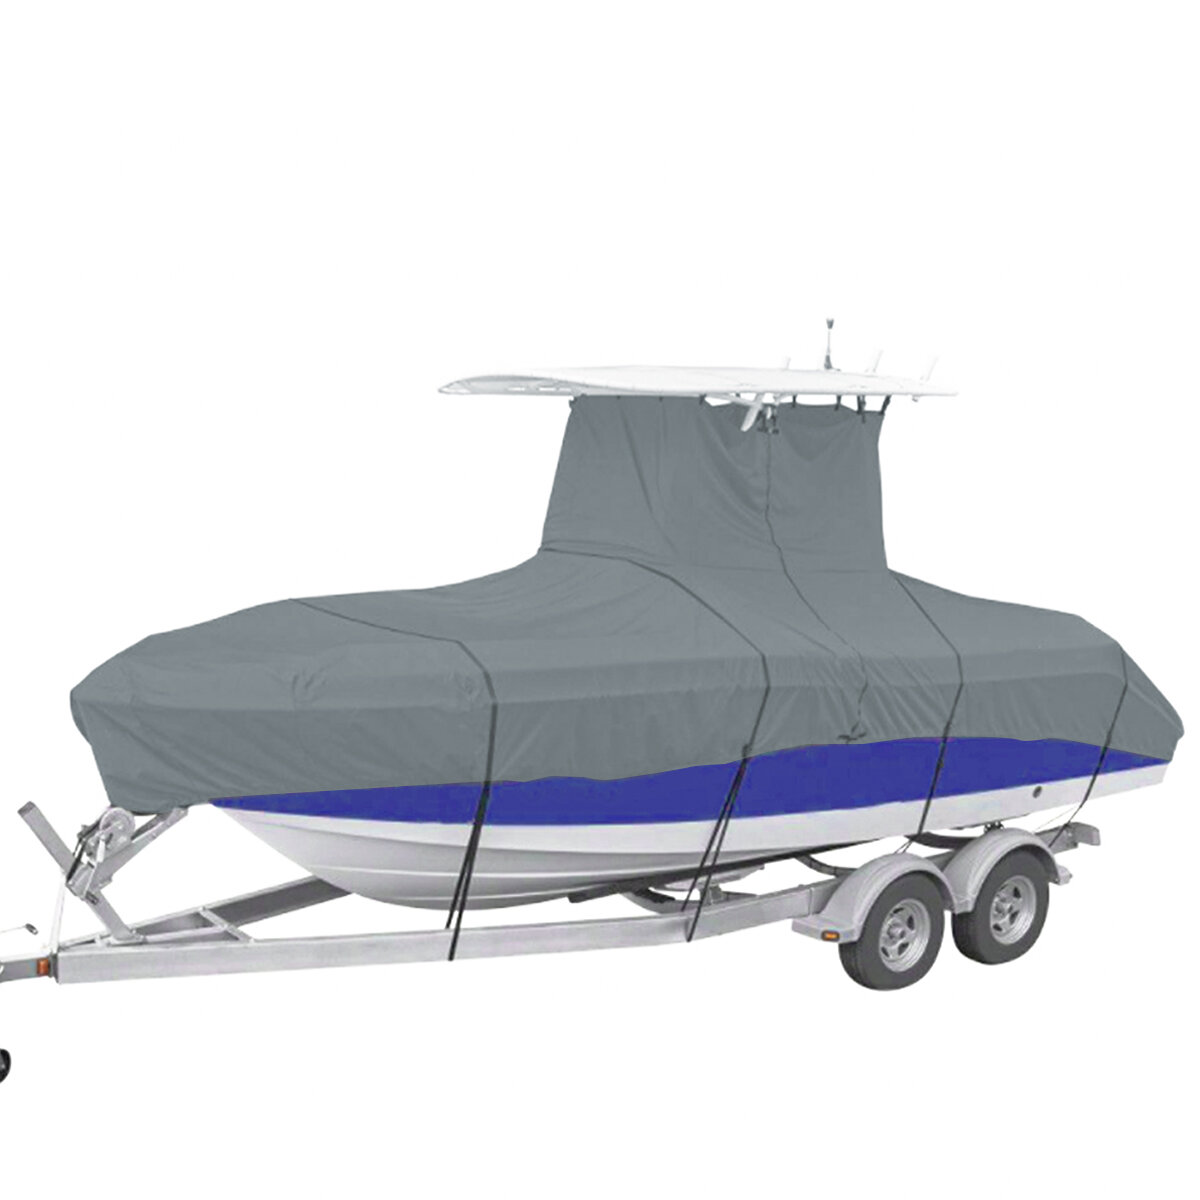 210D Waterproof Heavy-Duty Center Console T-Top Roof Boat Cover Sun protection cloth Sunscreen